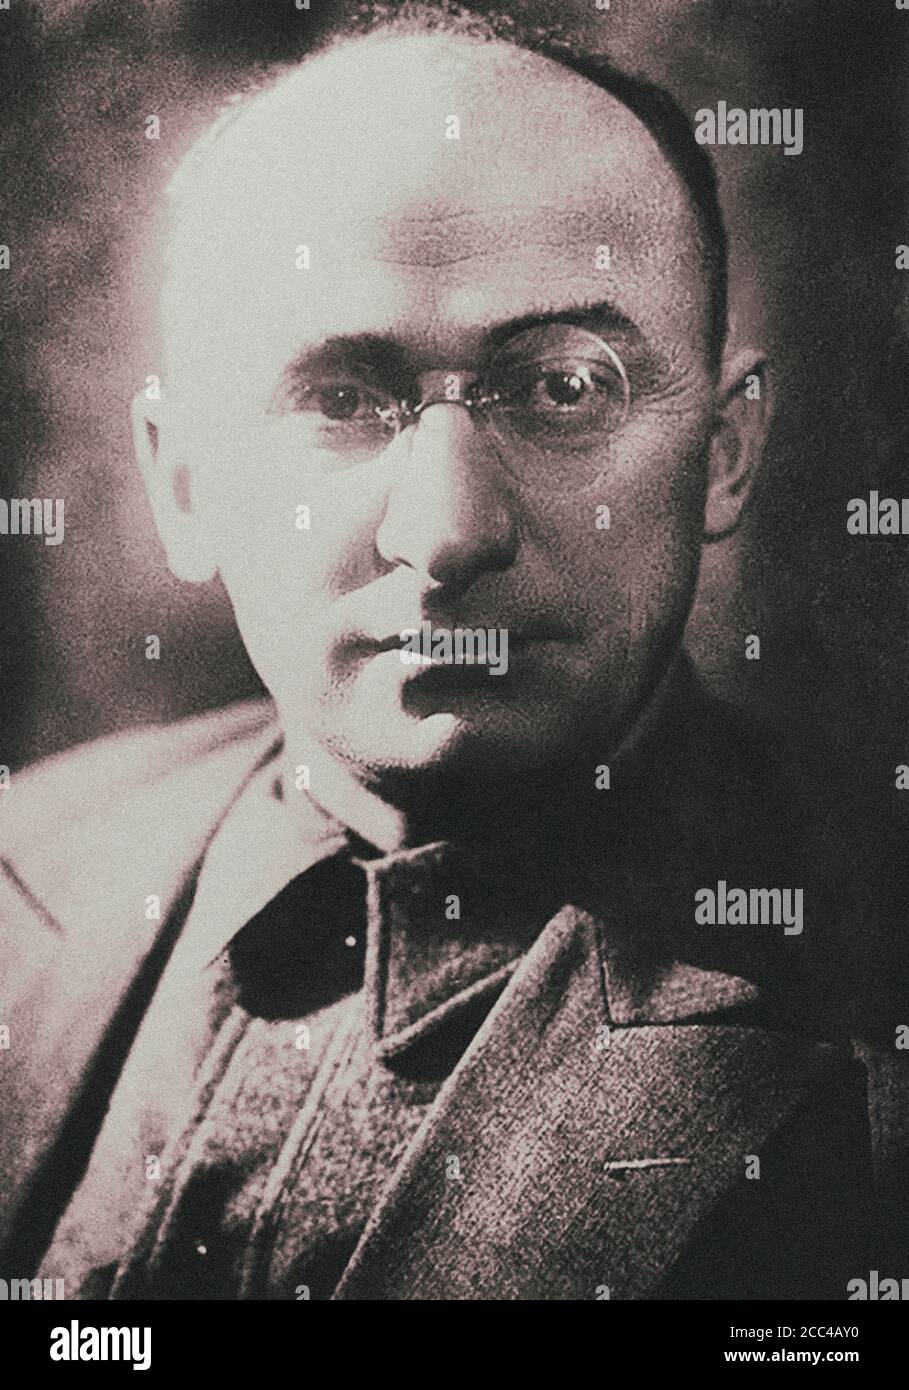 Lavrentiy Beria (1899 – 1953) was a Soviet politician, Marshal of the Soviet Union and state security administrator, chief of the Soviet security, and Stock Photo